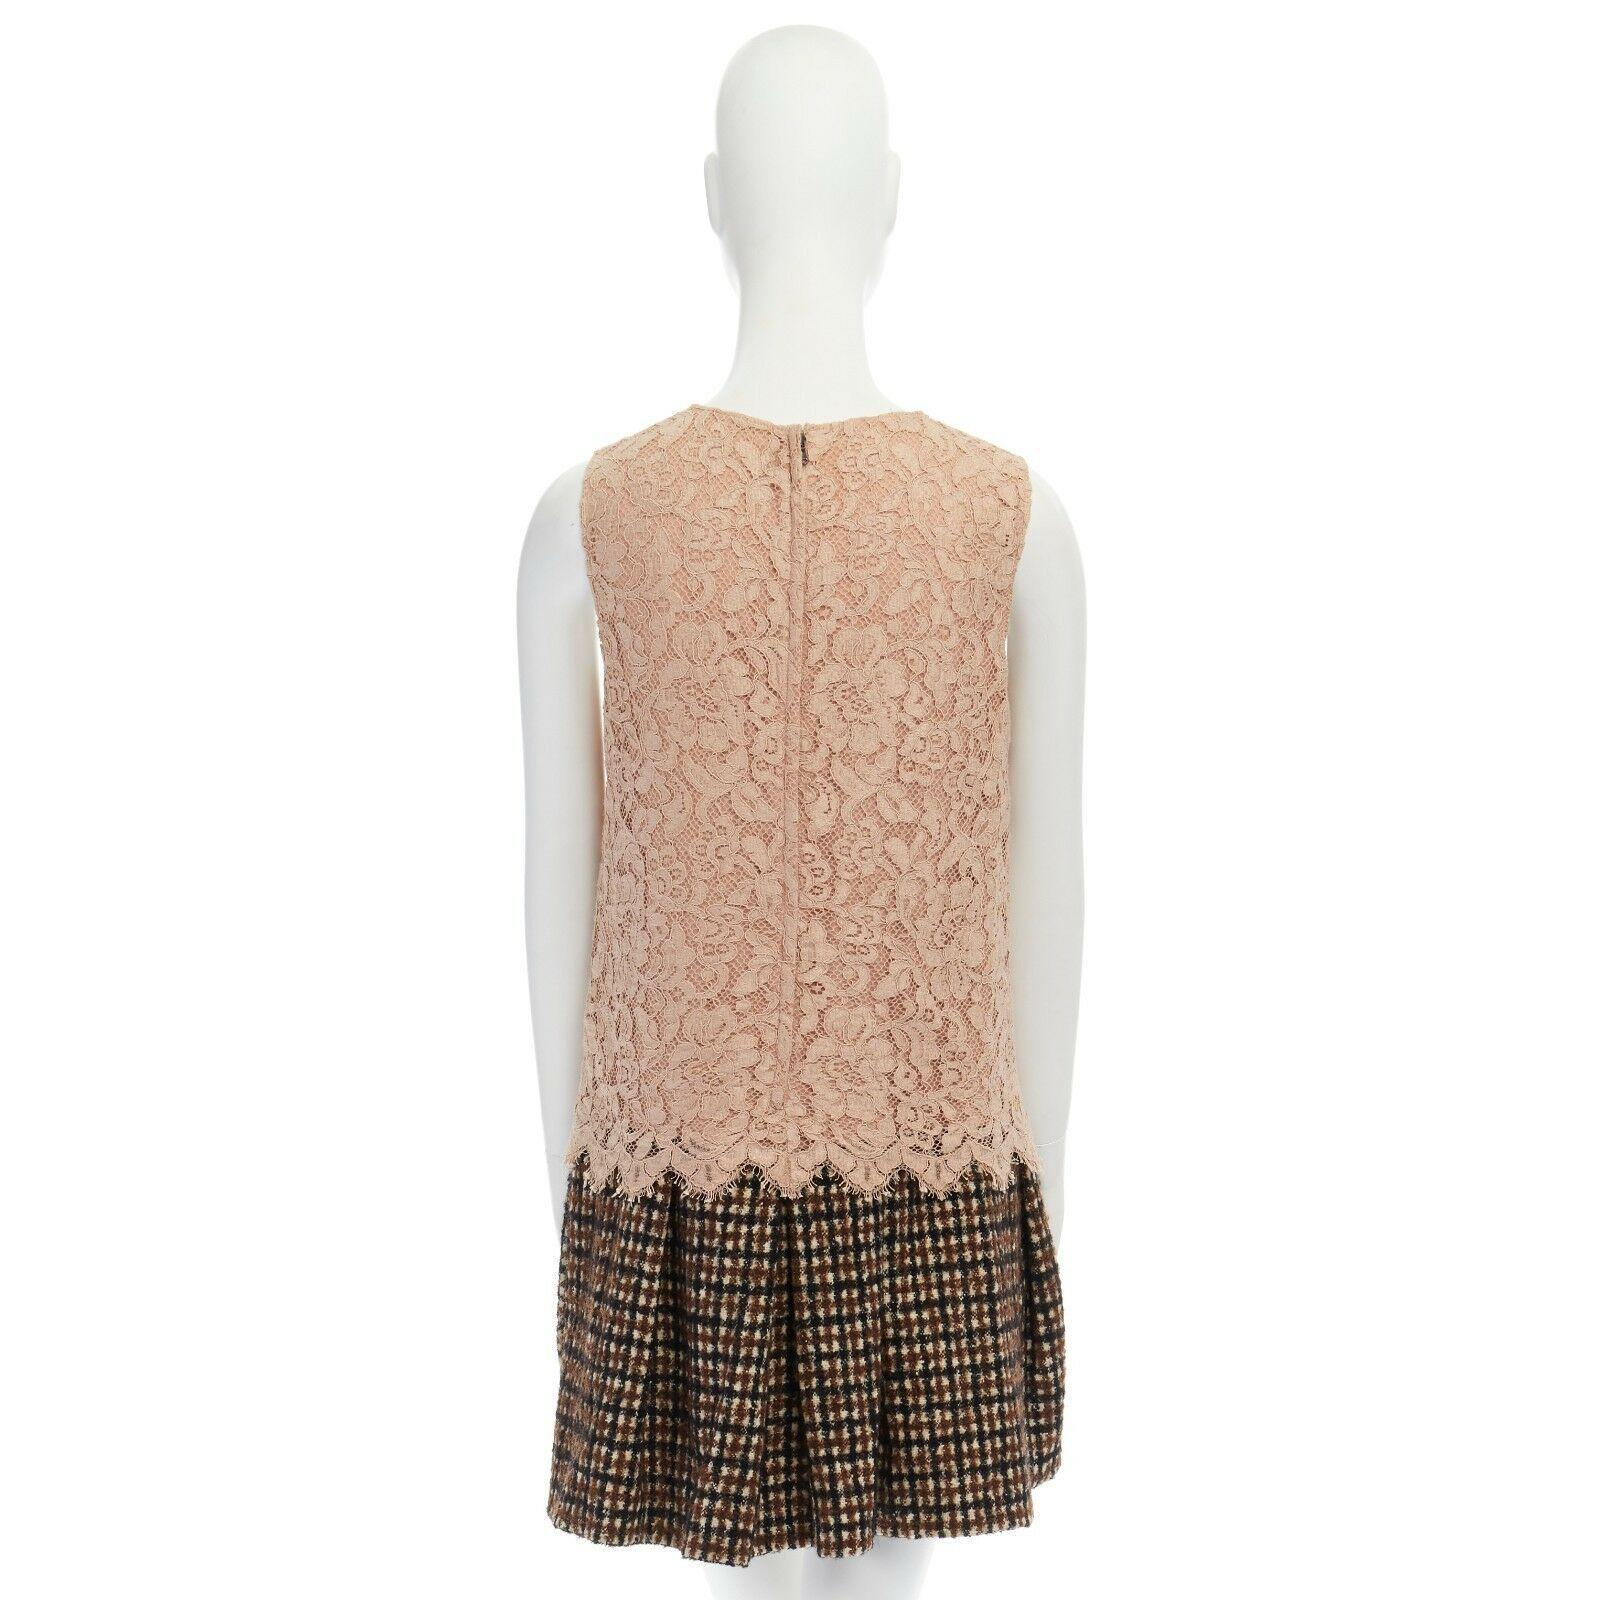 DOLCE GABBANA nude floral lace brown checked wool boucle skirt cocktail dress S 2